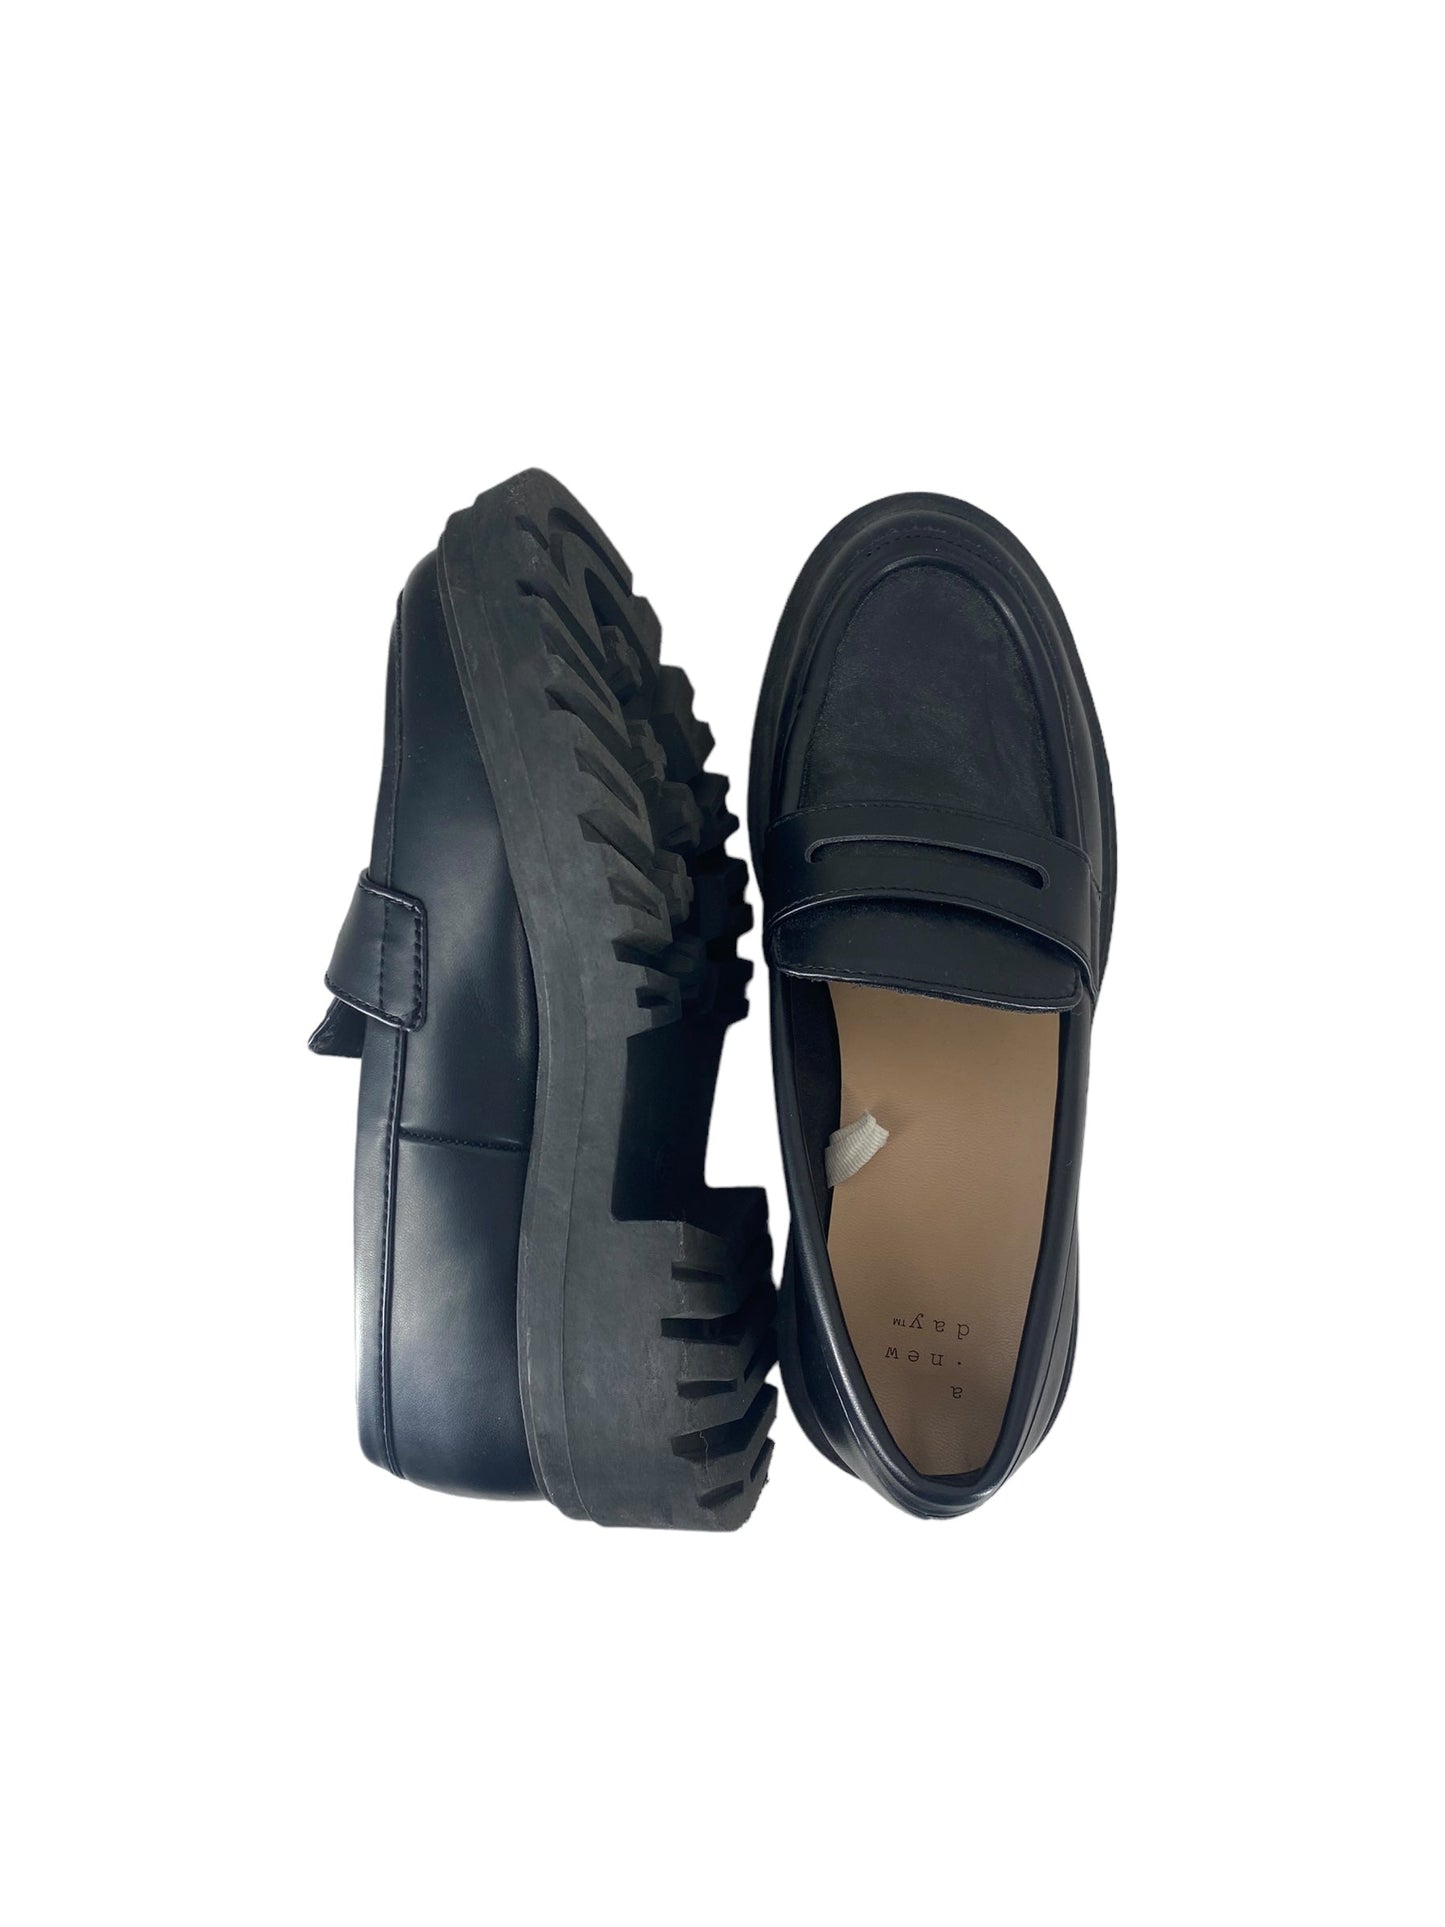 Black Shoes Flats A New Day, Size 6.5